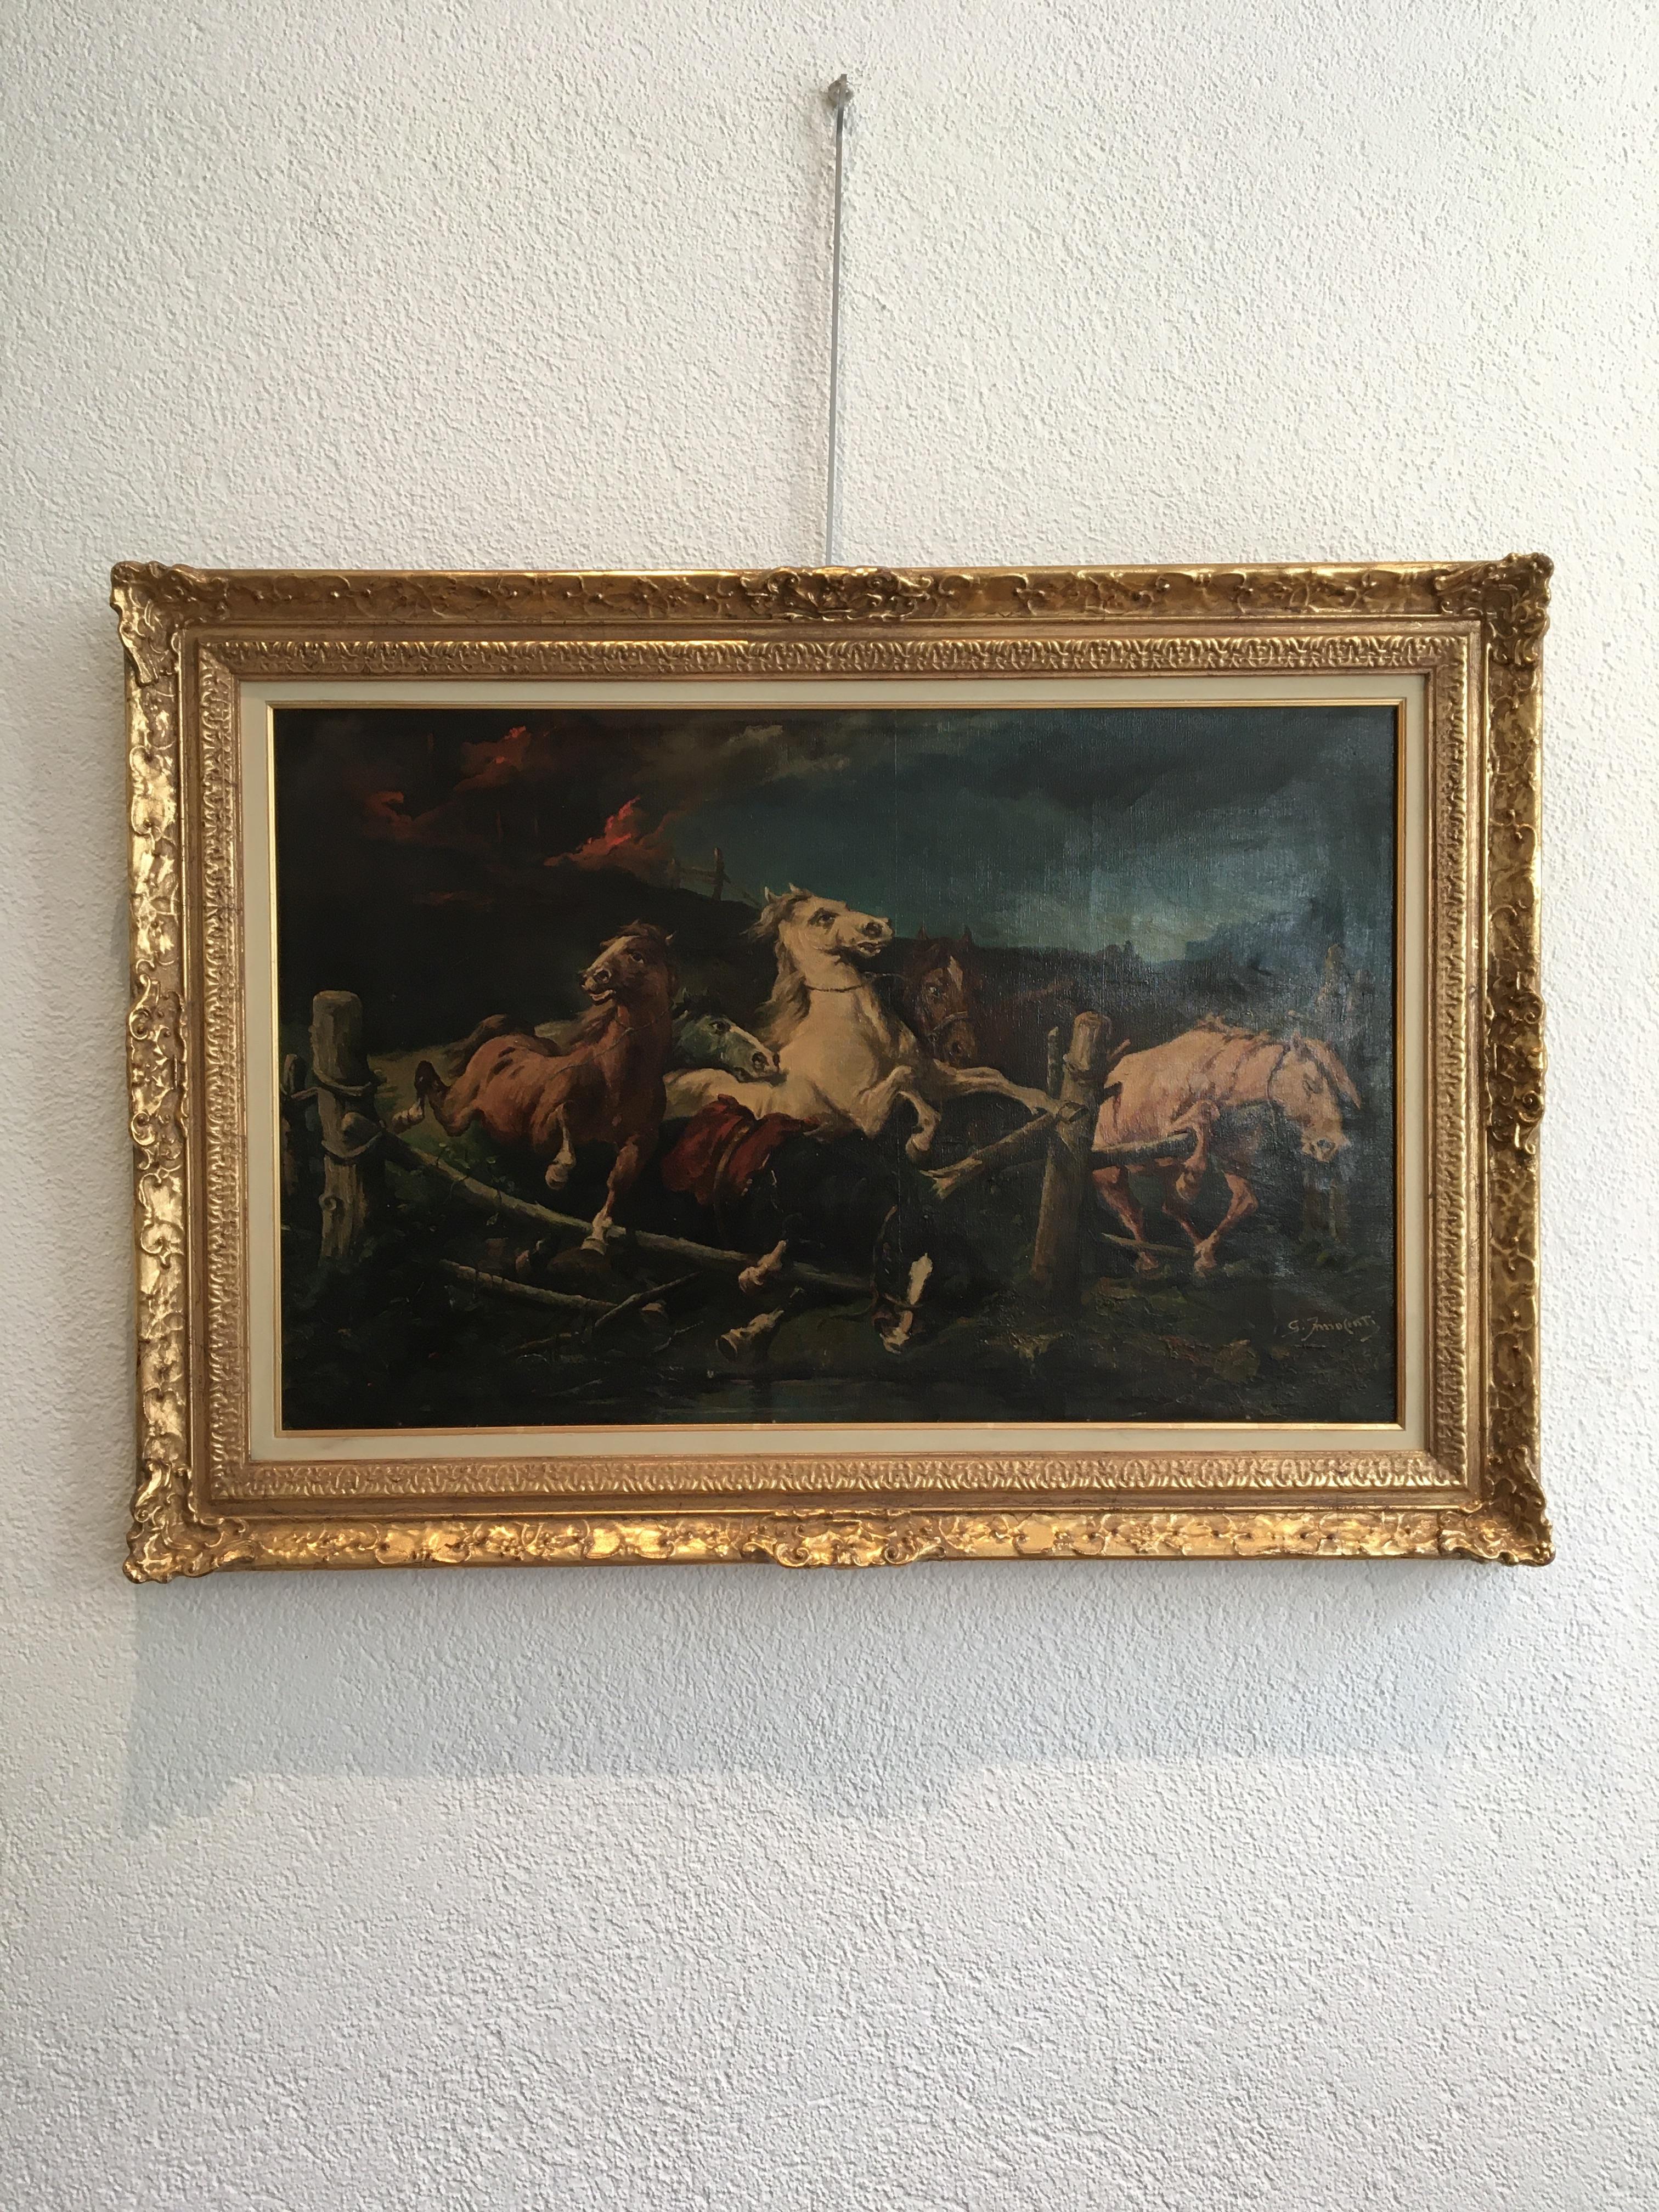 Horses panicked by fire - Painting by G. Innocente